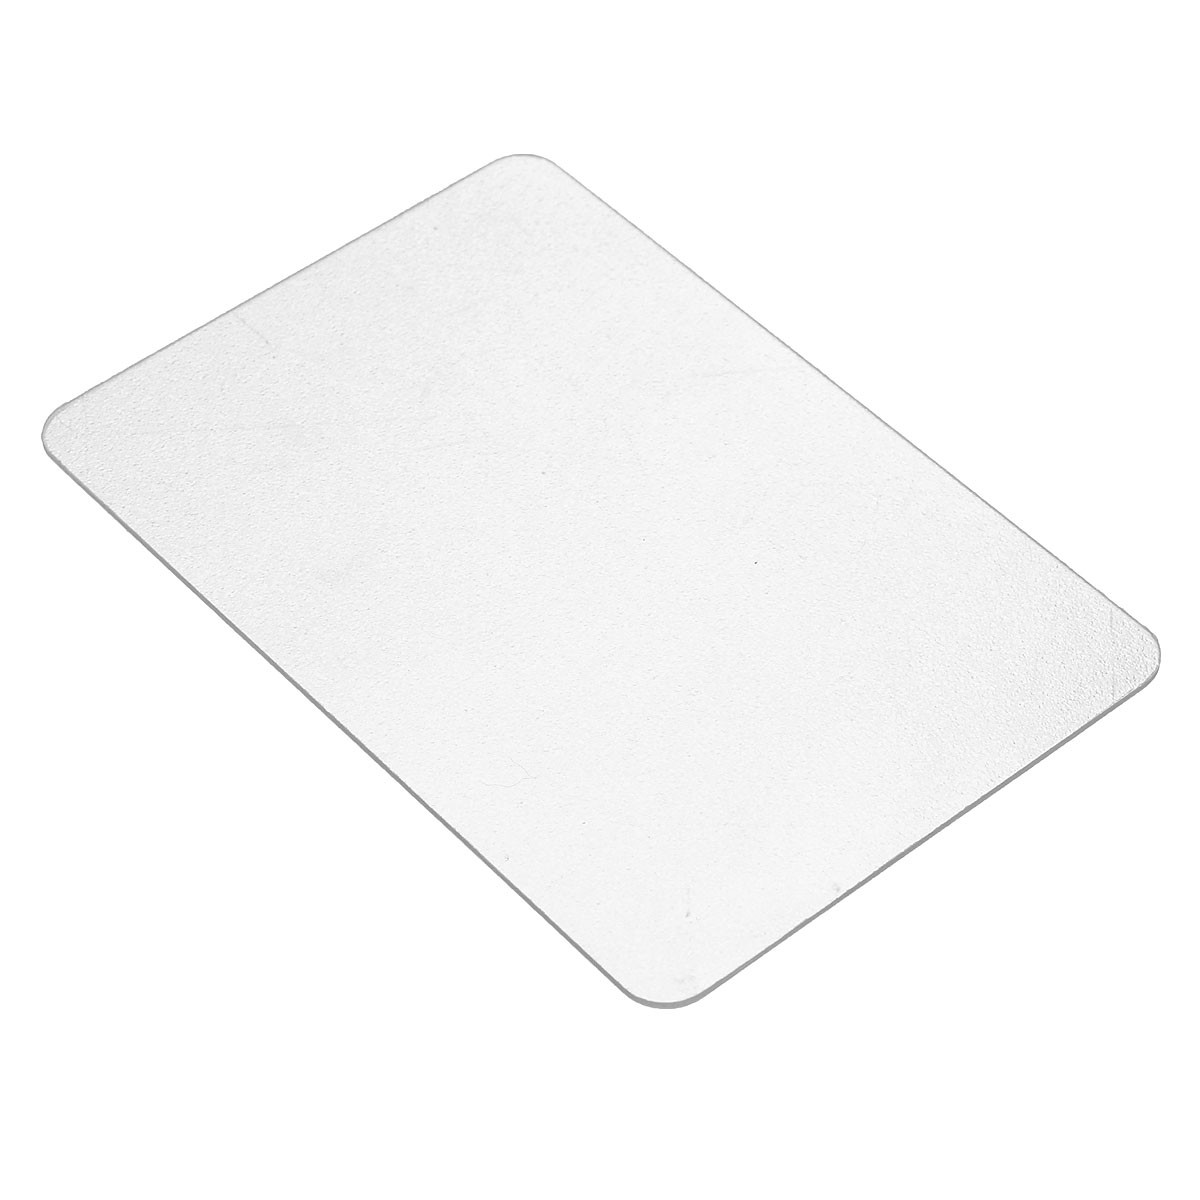 Clear-Soft-Silicone-Nail-Stamping-Template-Printer-Set-Scraper-Image-Plate-Transfer-Tools-DIY-Design-1110281